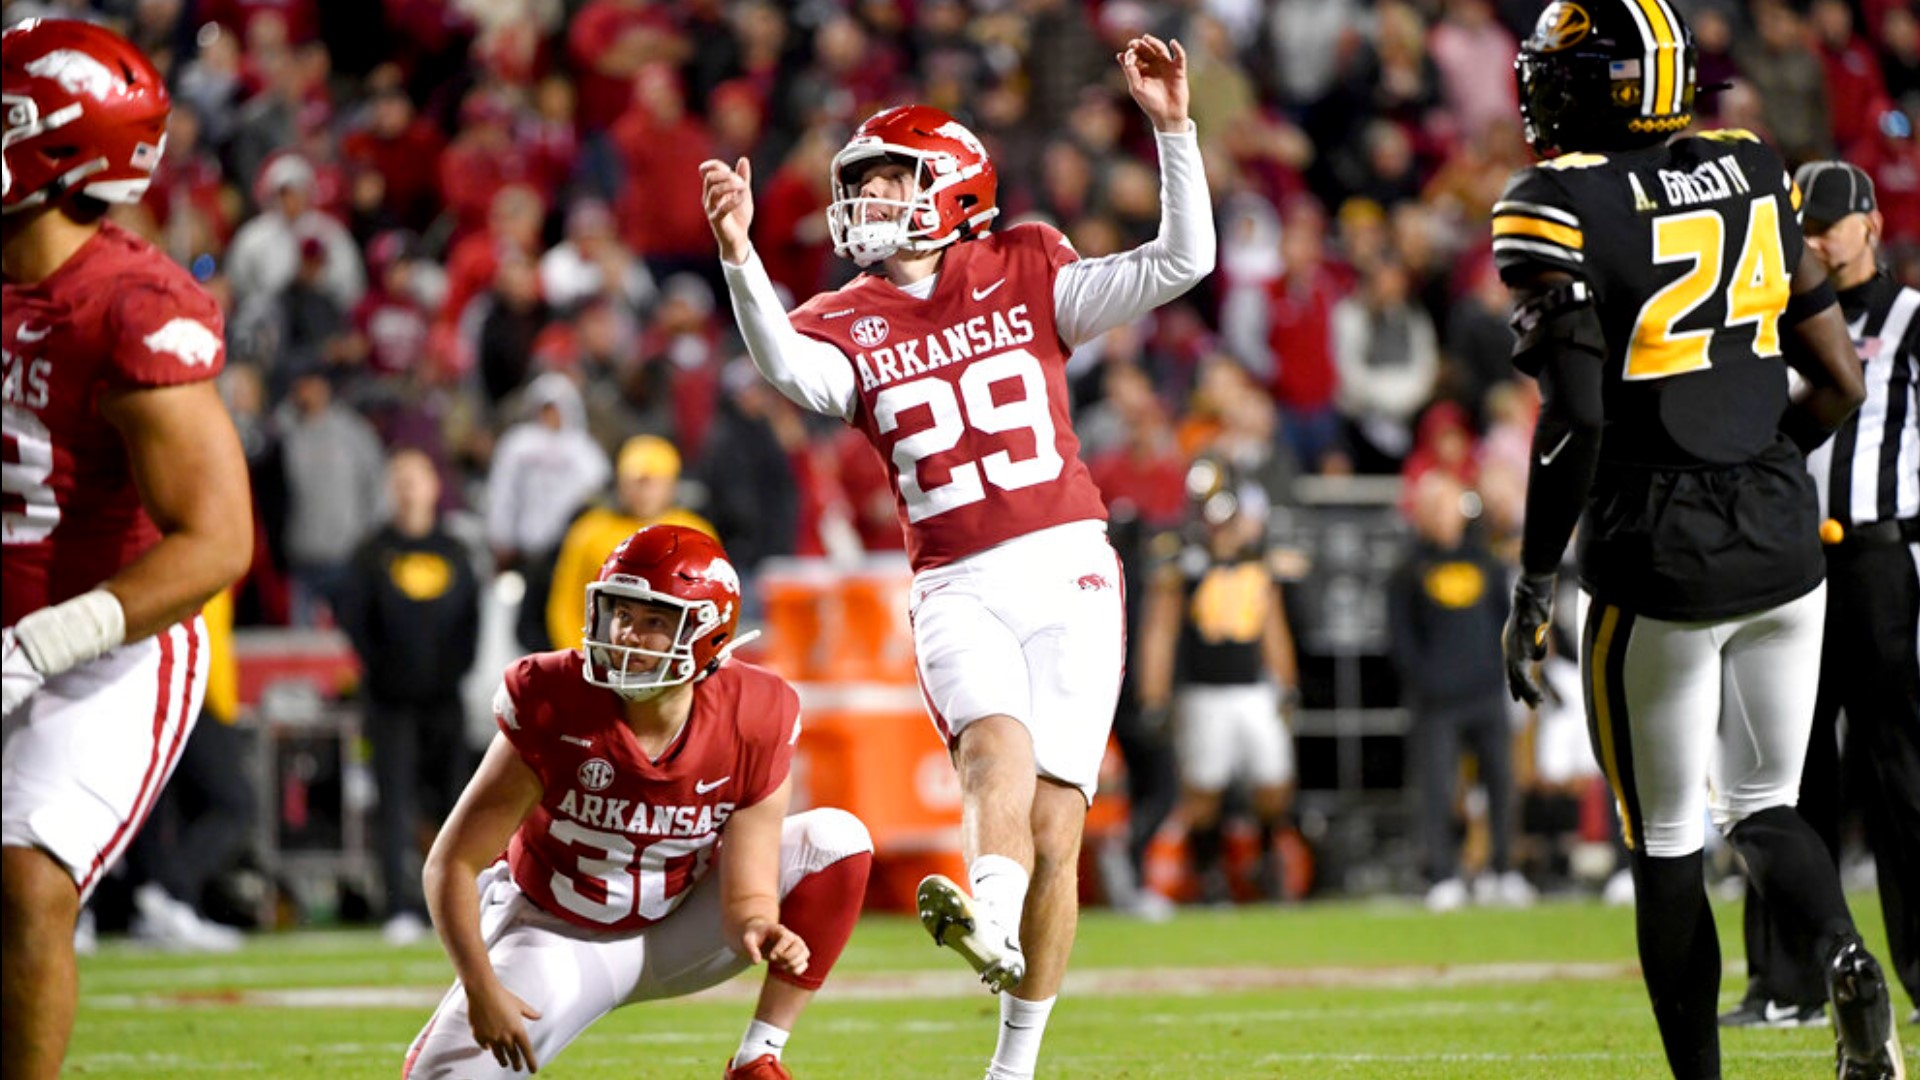 After earning SEC All-Freshman honors last season, Little's field goal accuracy gives the Razorbacks confidence in close, late-game situations.